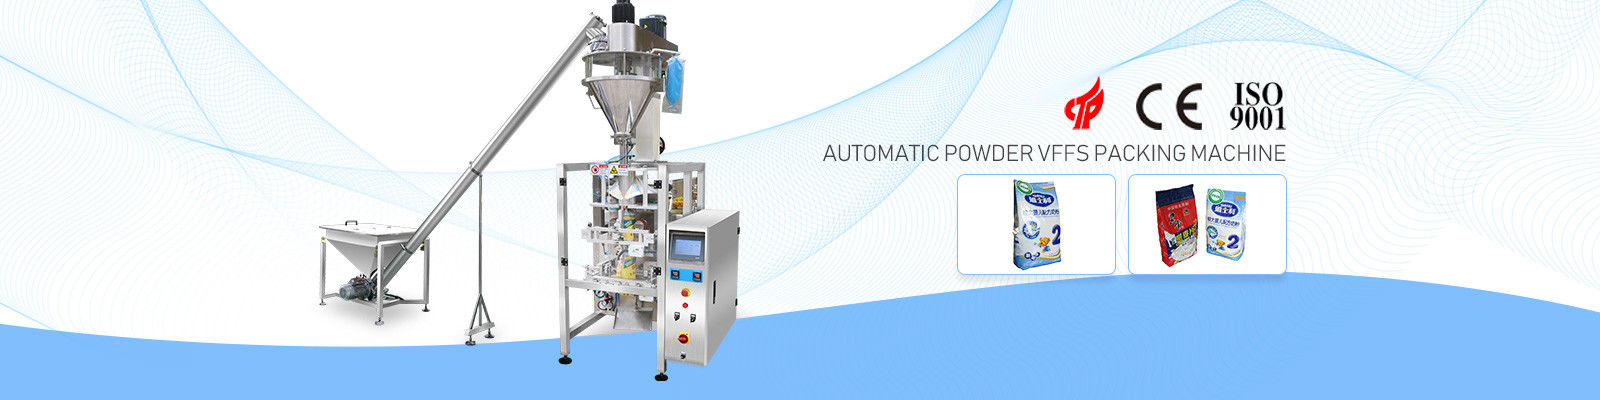 China best Automated Packing Machine on sales